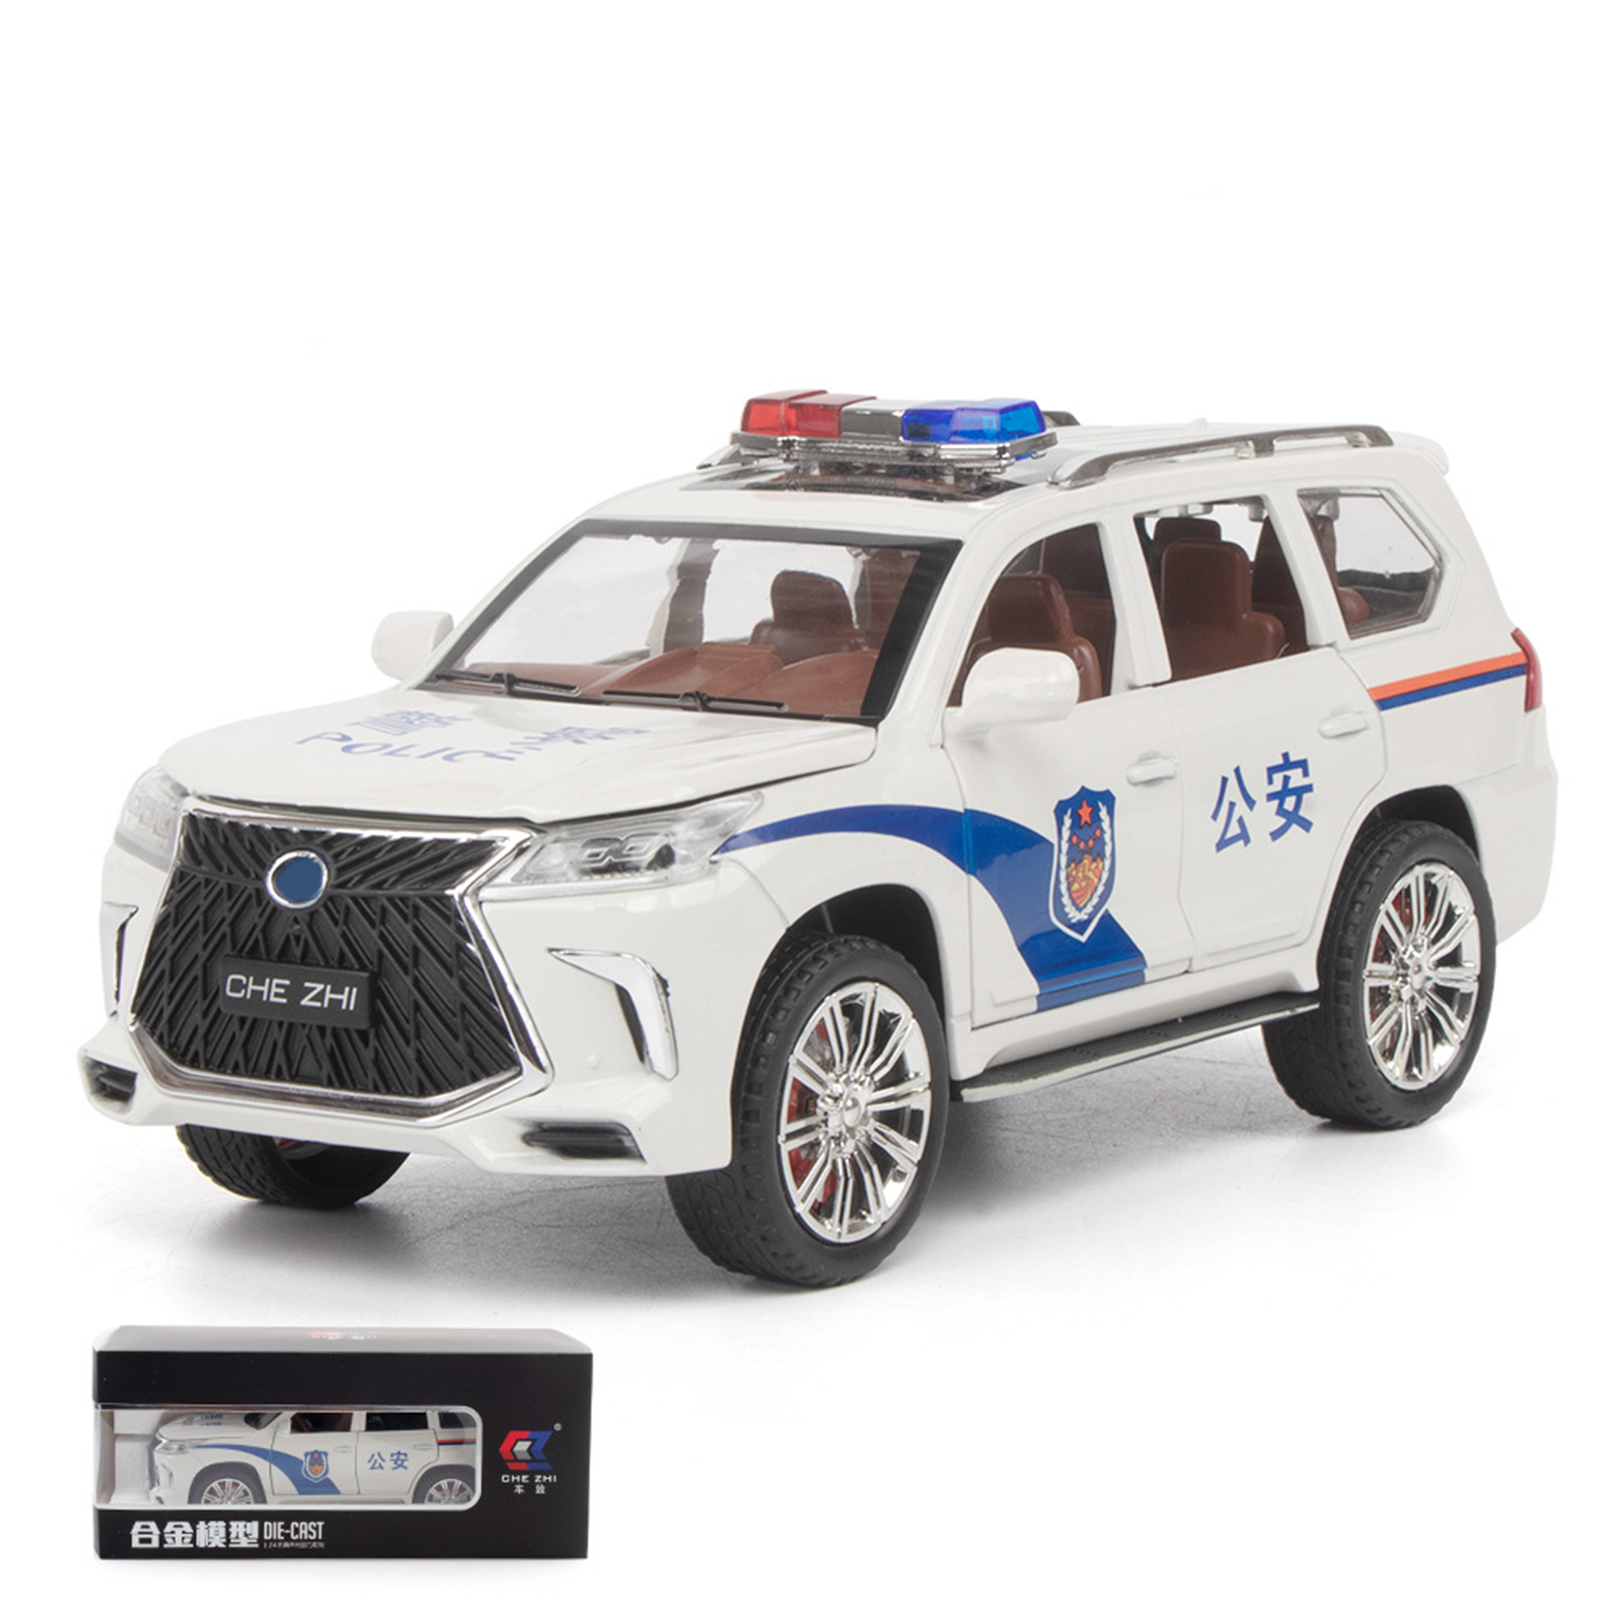 1/24 Diecast Off-Road Vehicle Model Simulation Alloy Pull Back Car with Sound Light Toys for Birthday Gifts